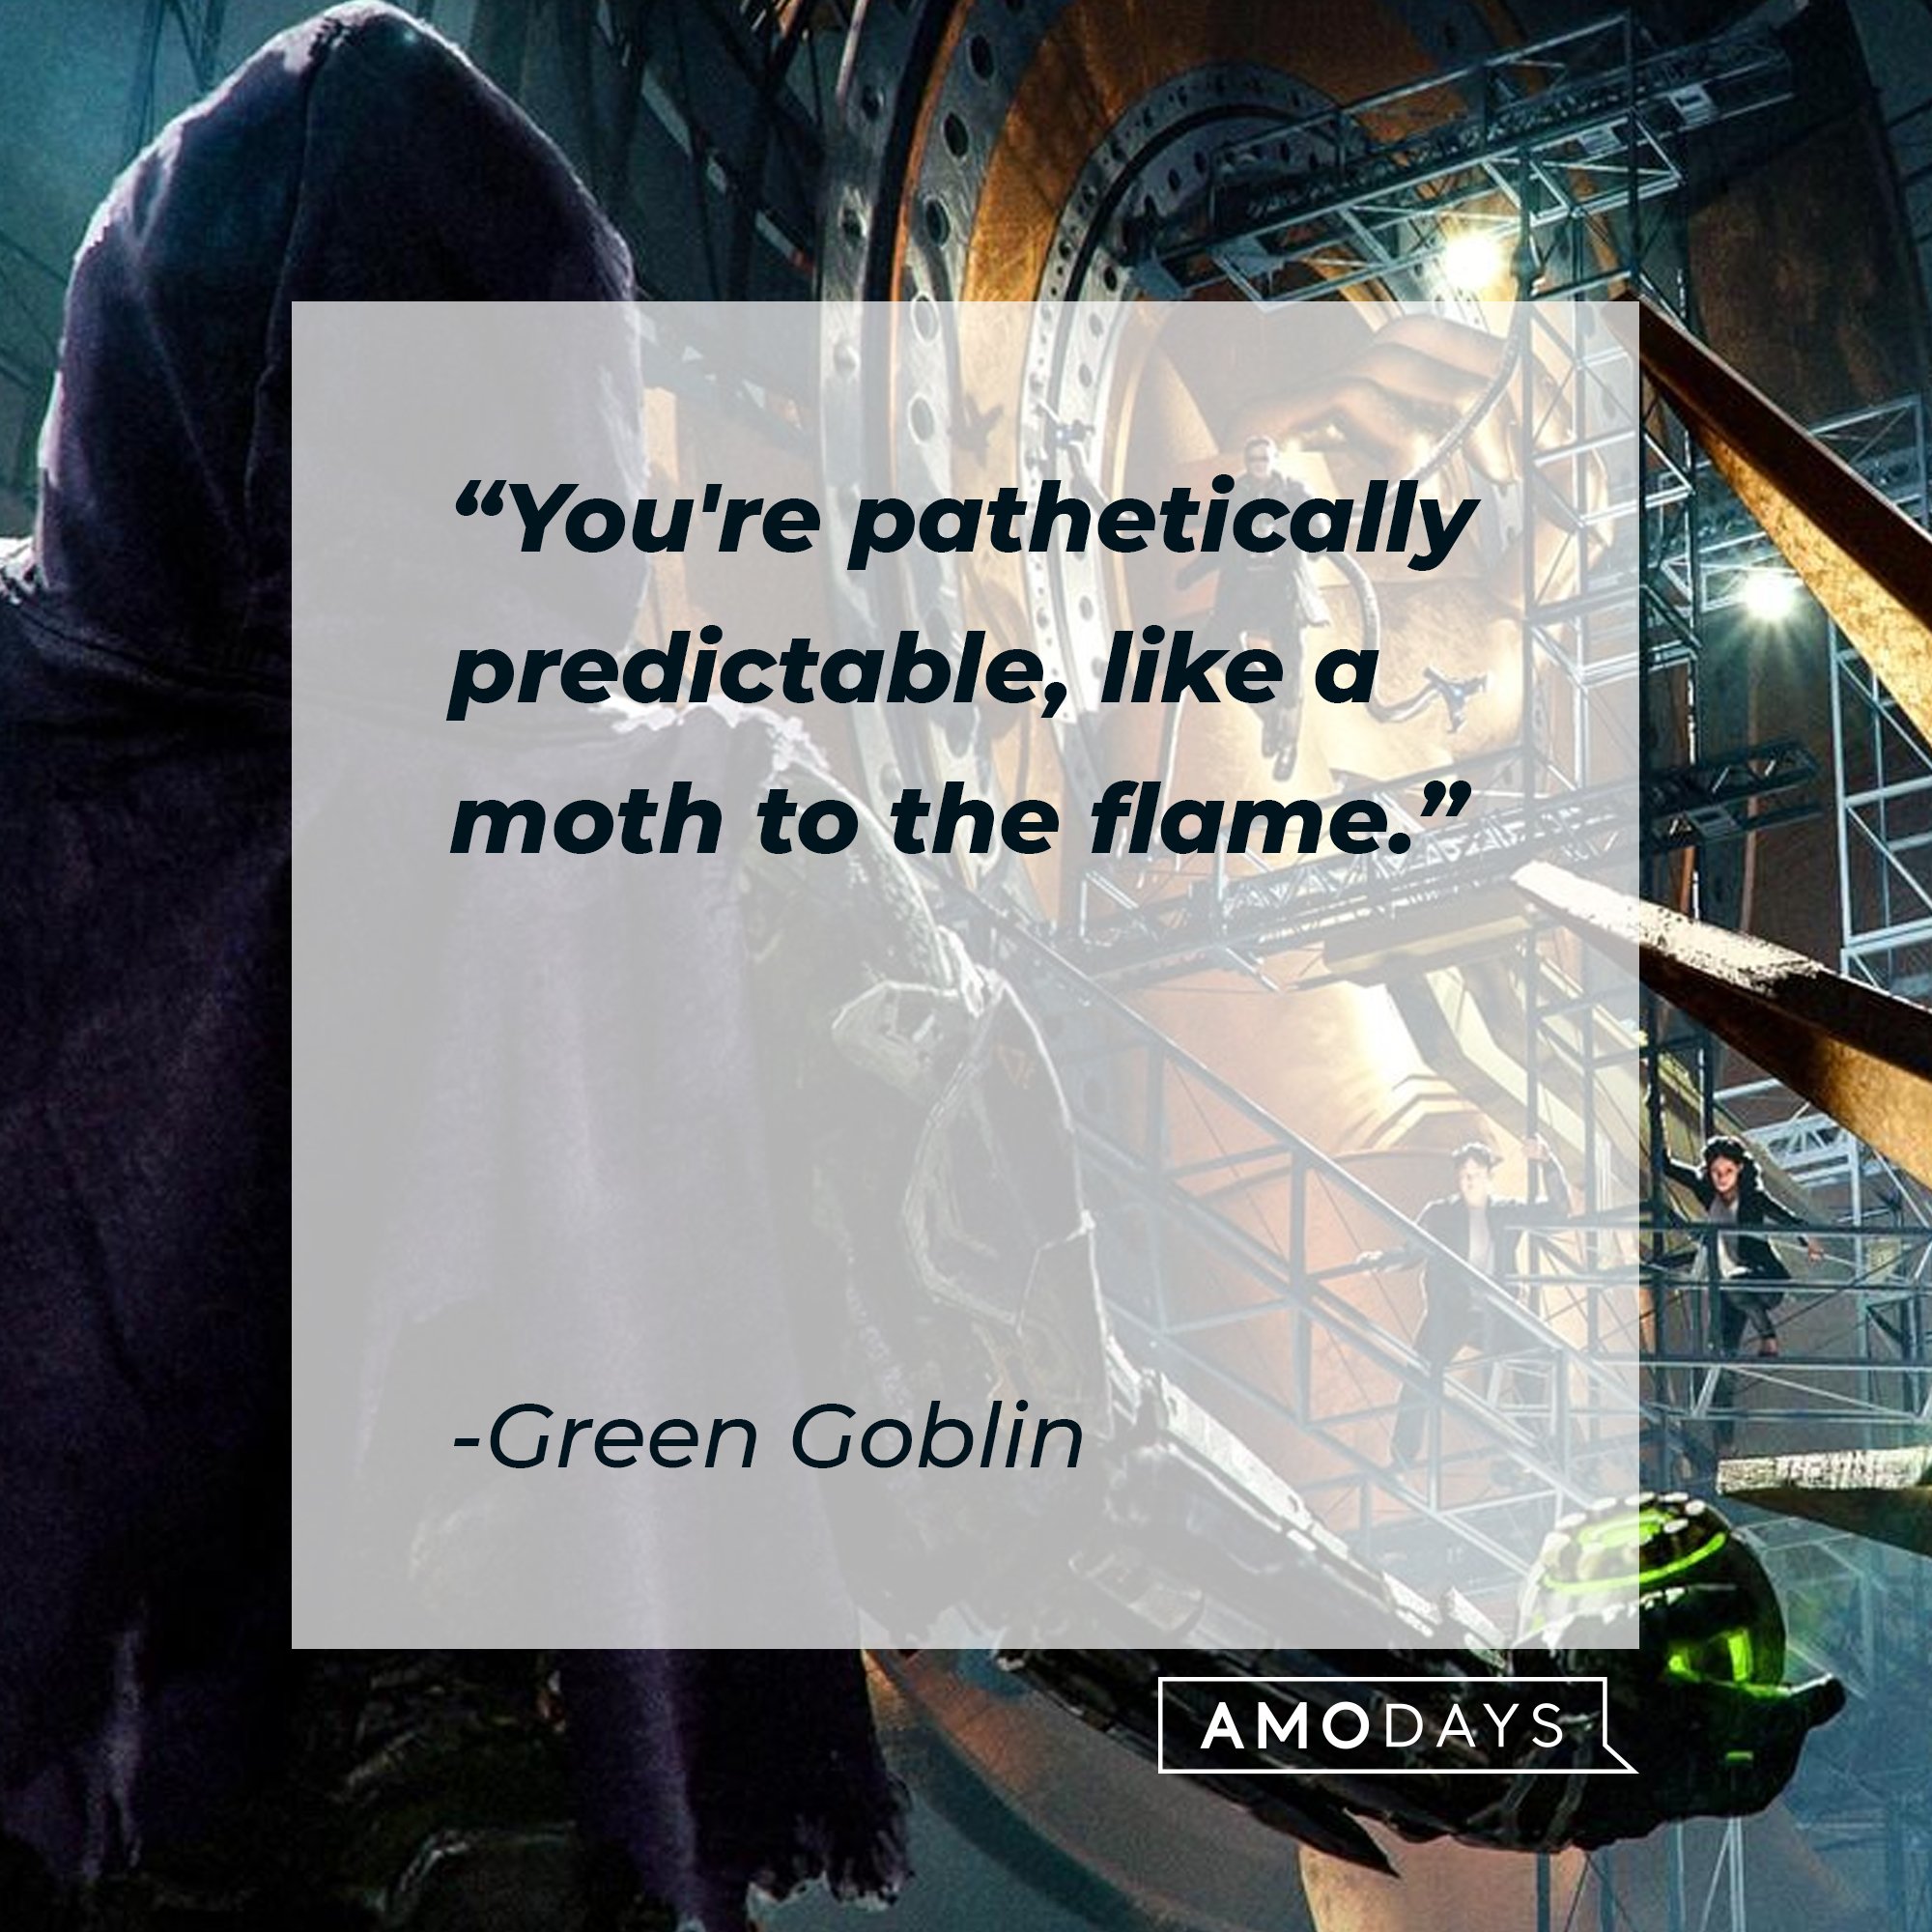 Green Goblin’s quote: "You're pathetically predictable, like a moth to the flame." | Image: AmoDays